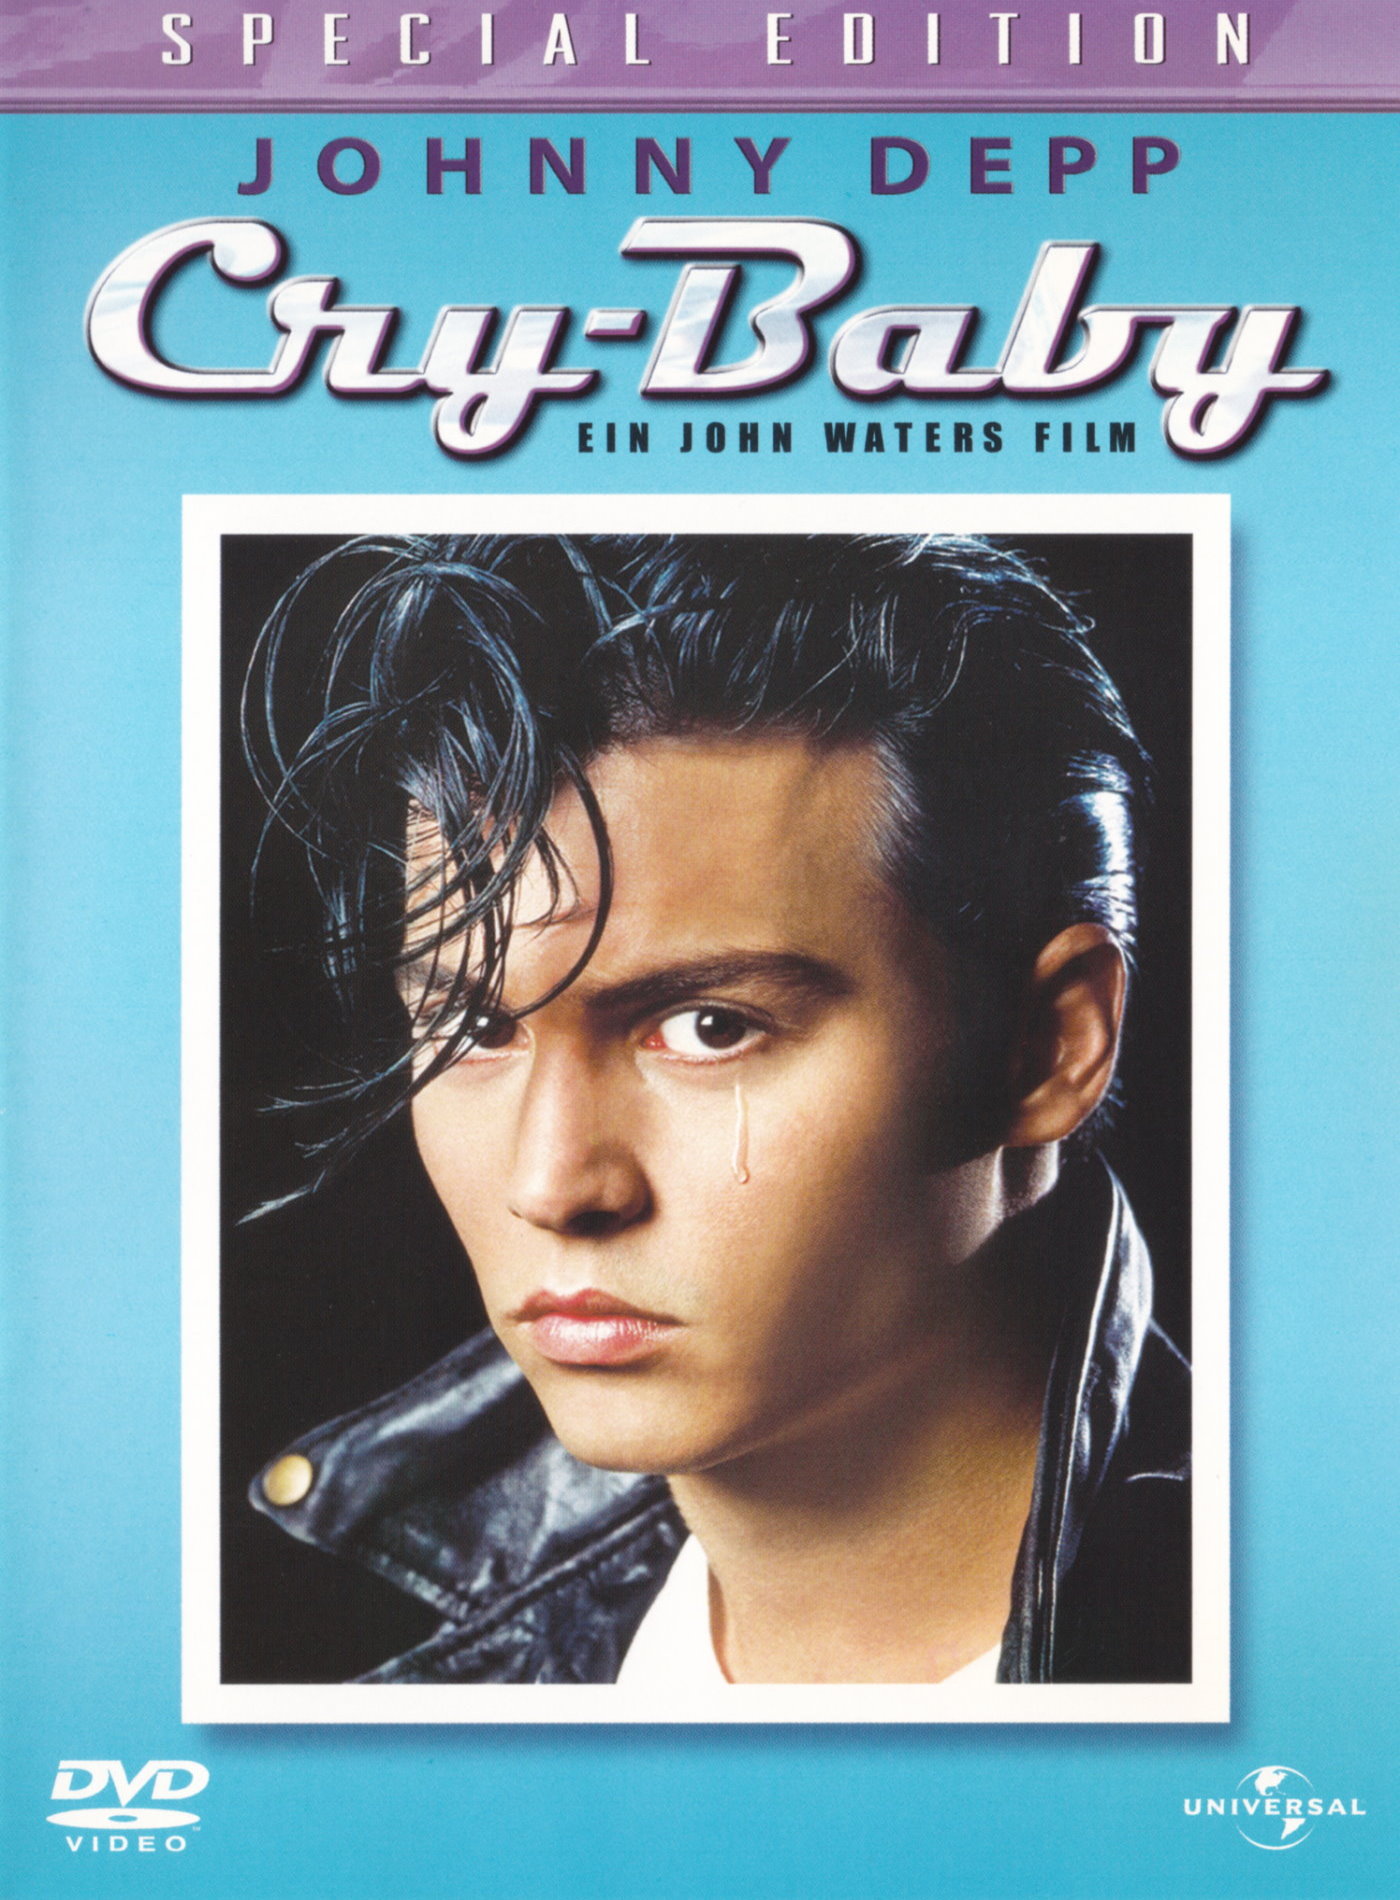 Cover - Cry Baby.jpg